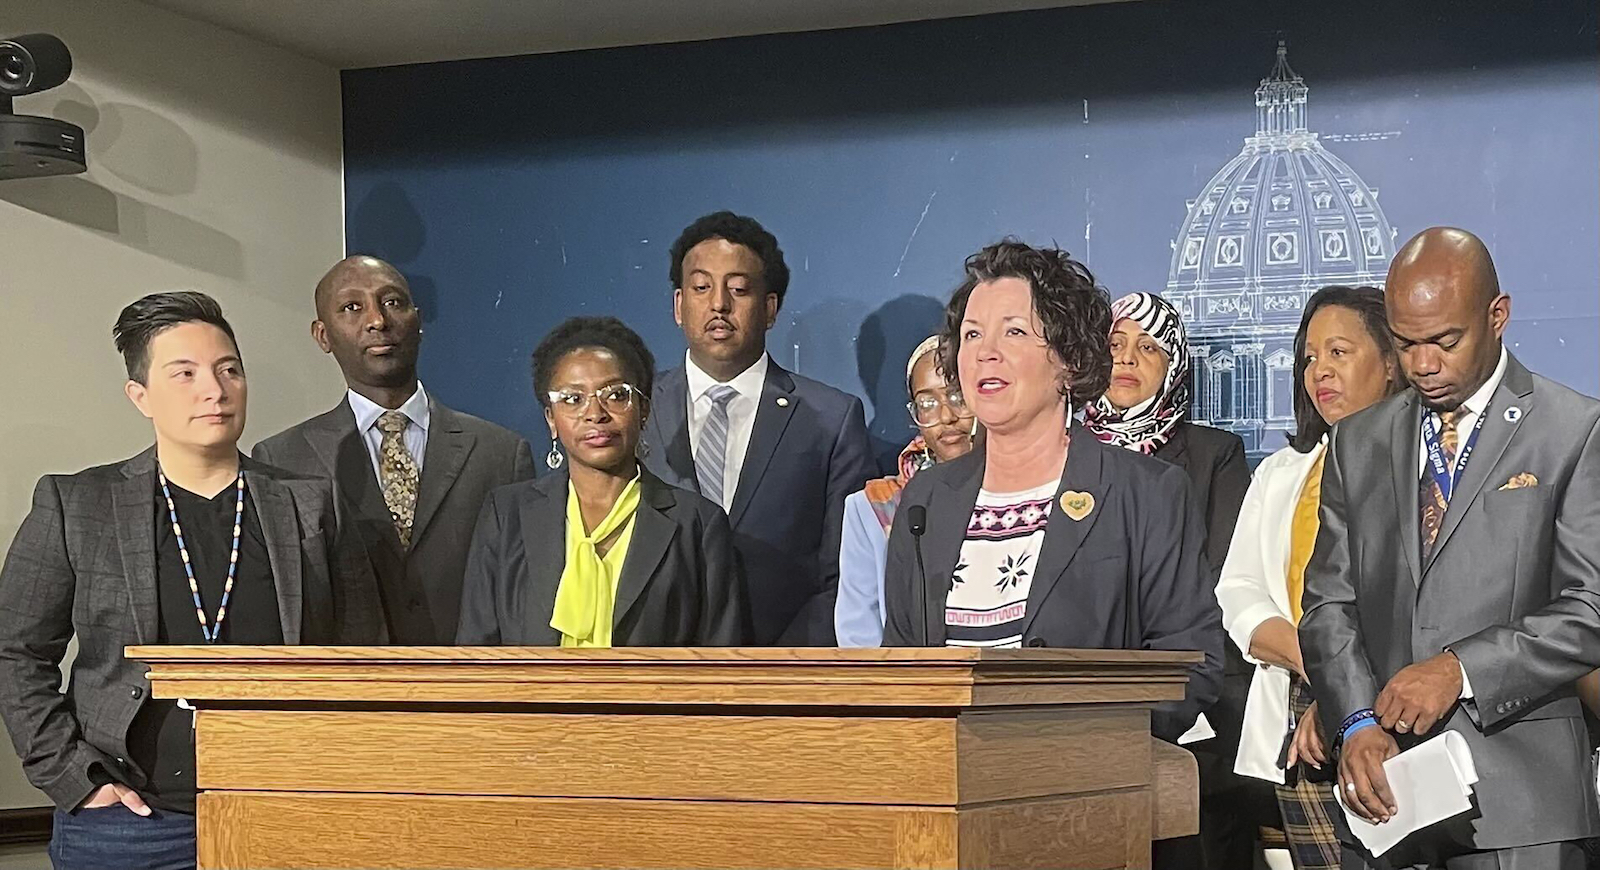 A group of people stand in front of a podium. In the center, speaking, is a woman in a suit.